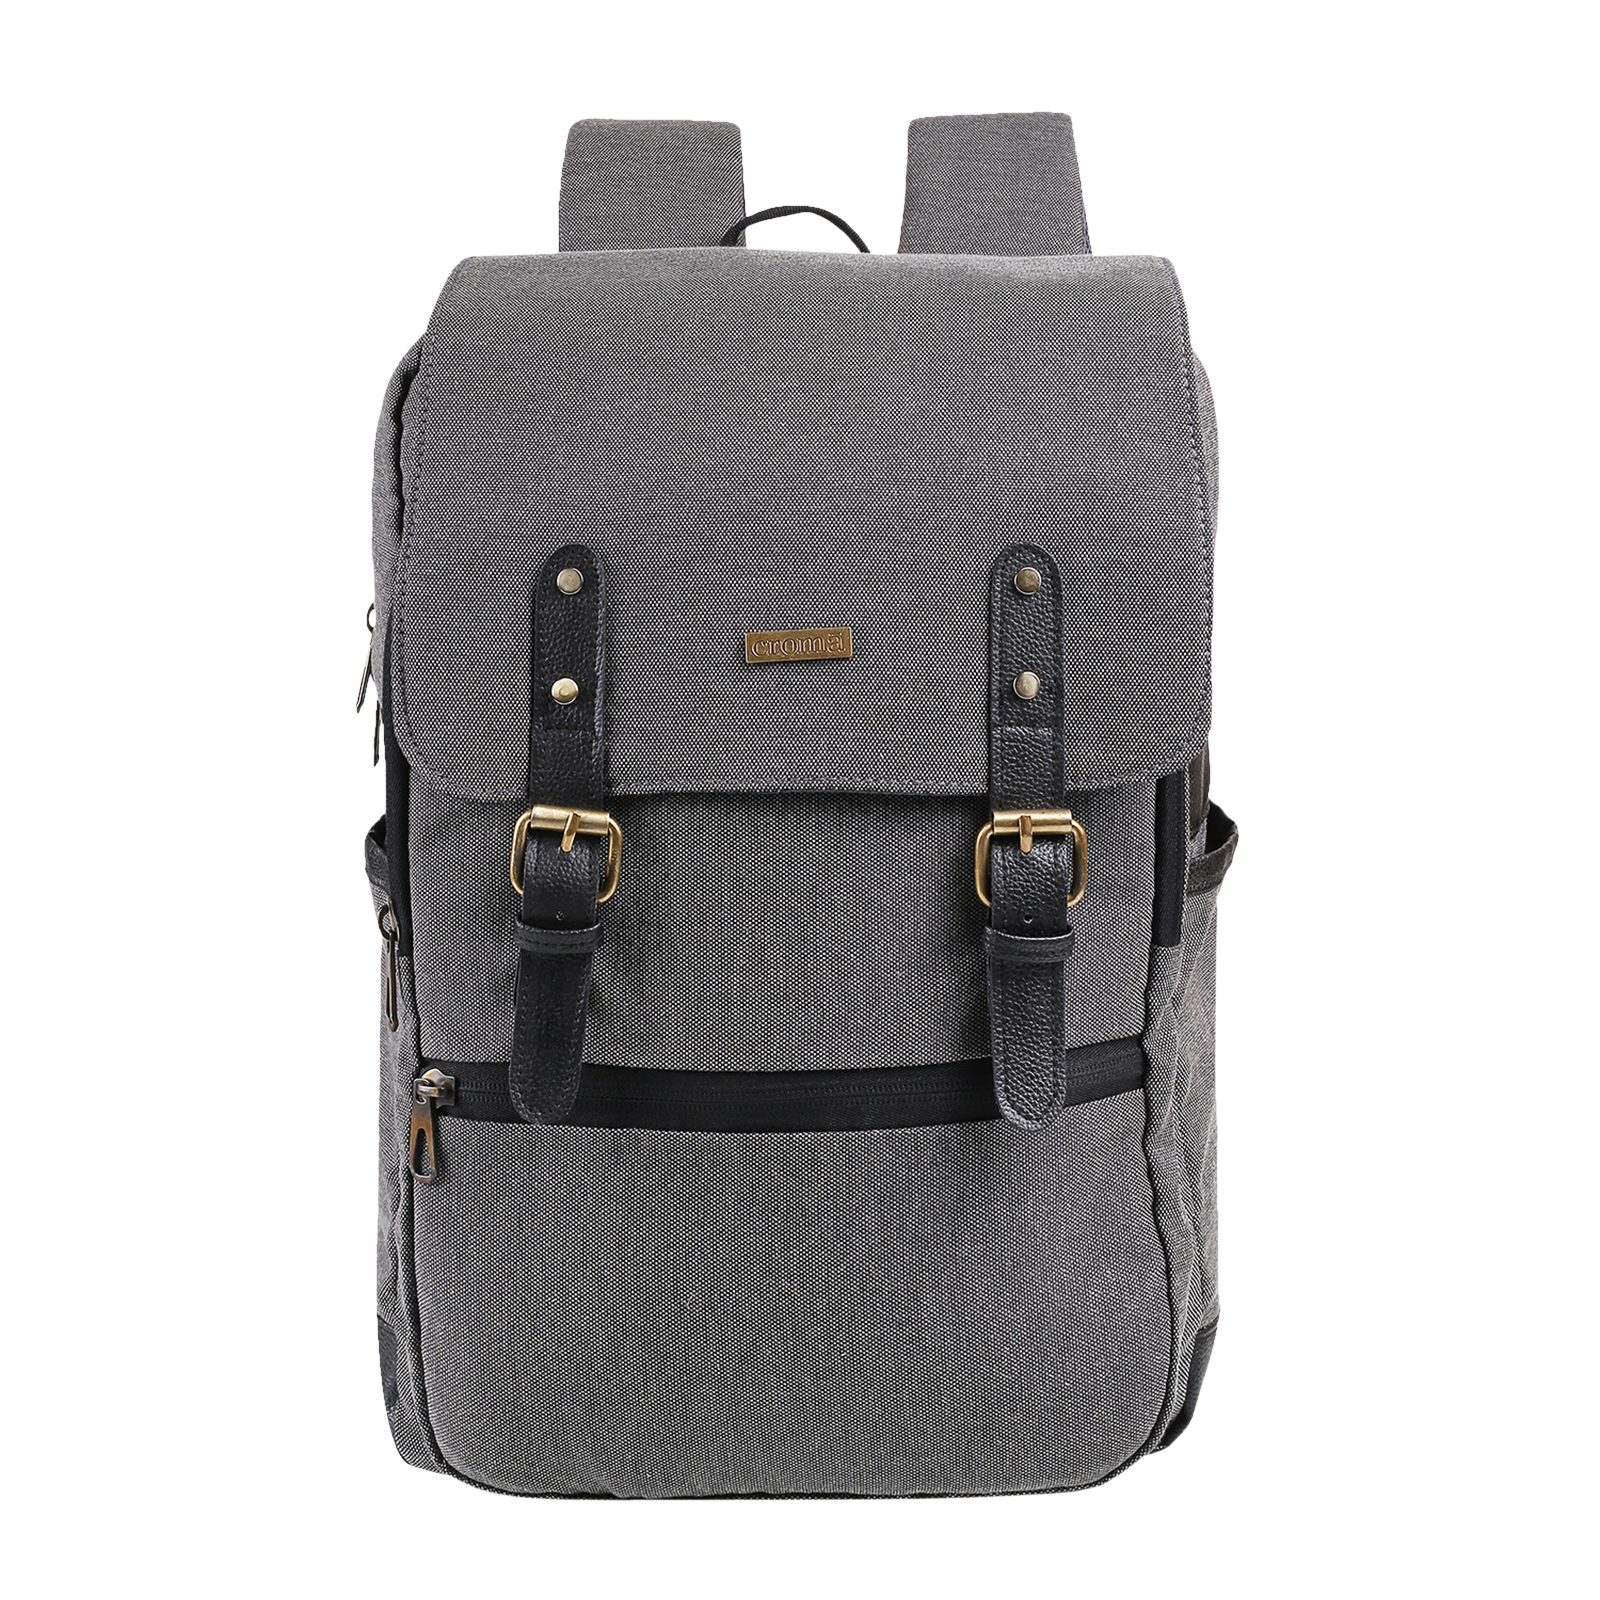 Croma XL5168 Backpack in Warangal - Dealers, Manufacturers & Suppliers -  Justdial